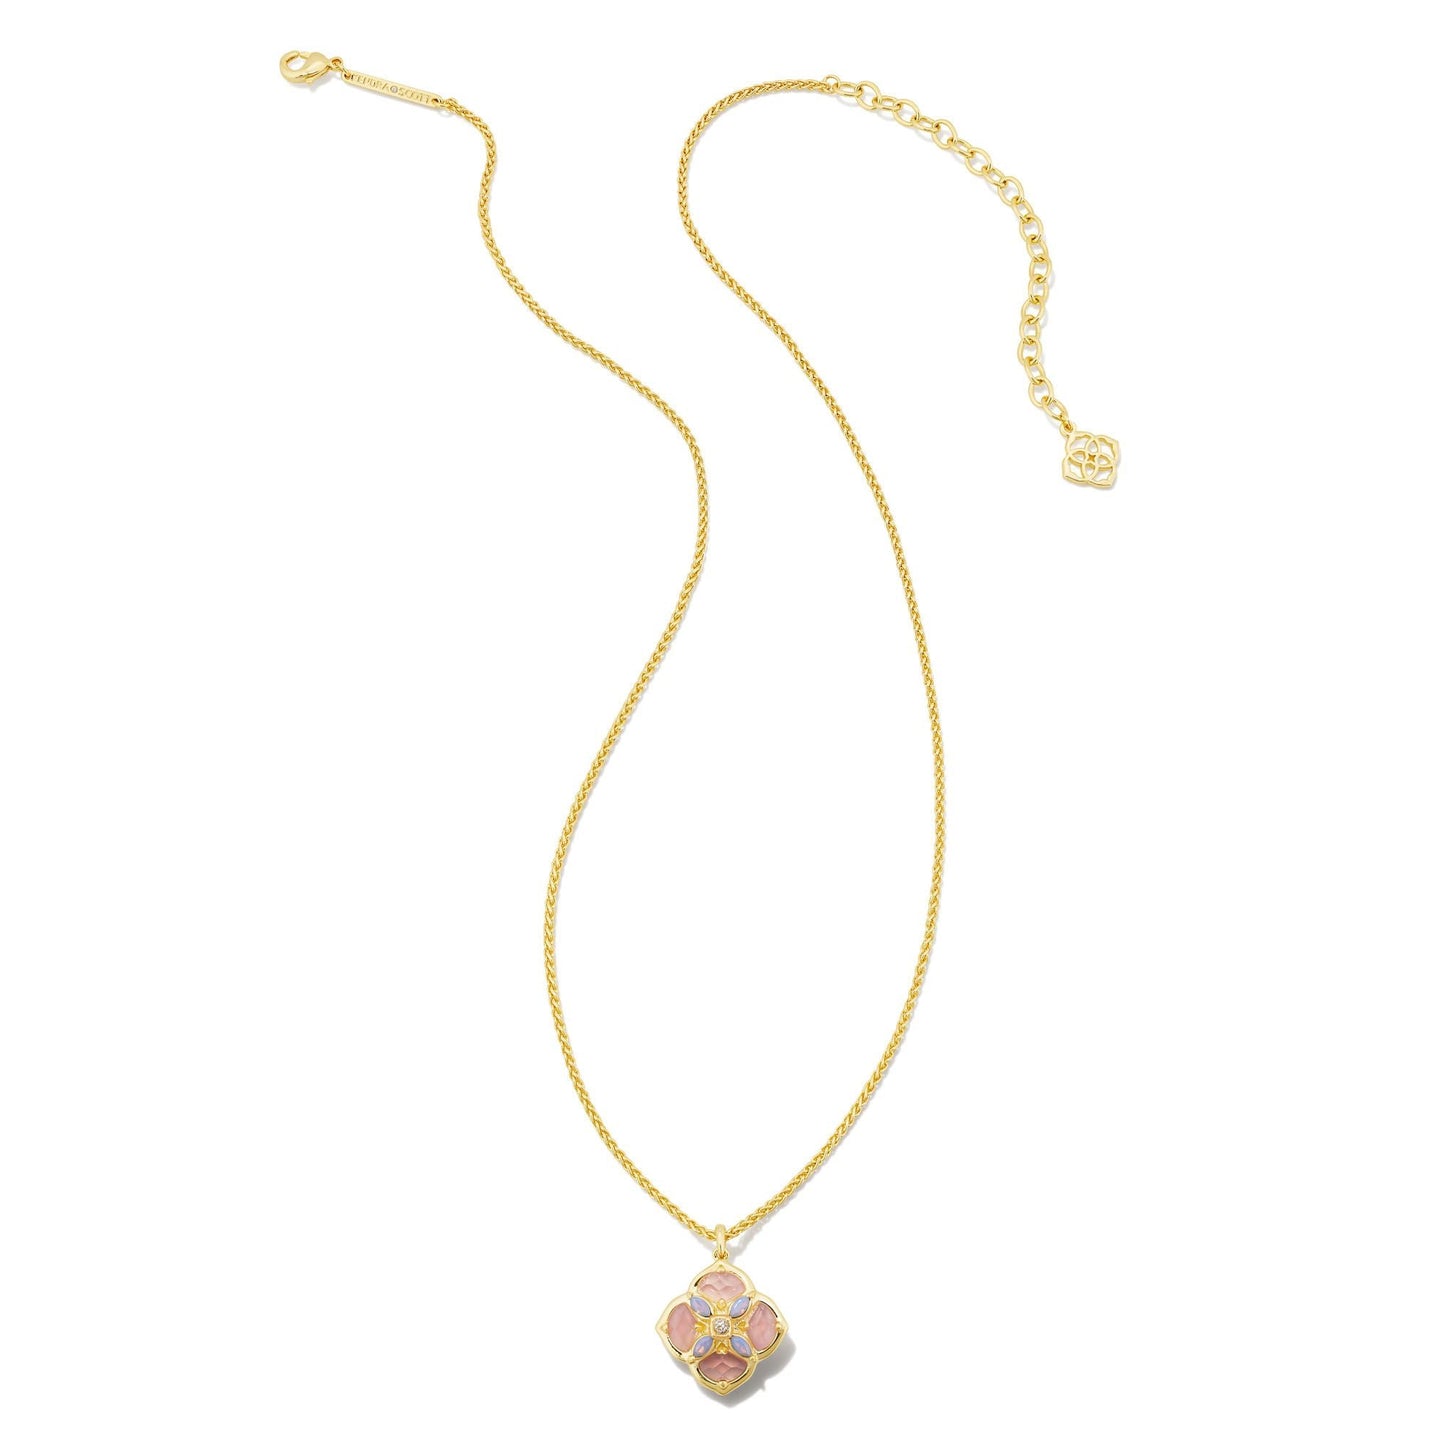 Dira Stone Pendant Necklace in Gold Pink